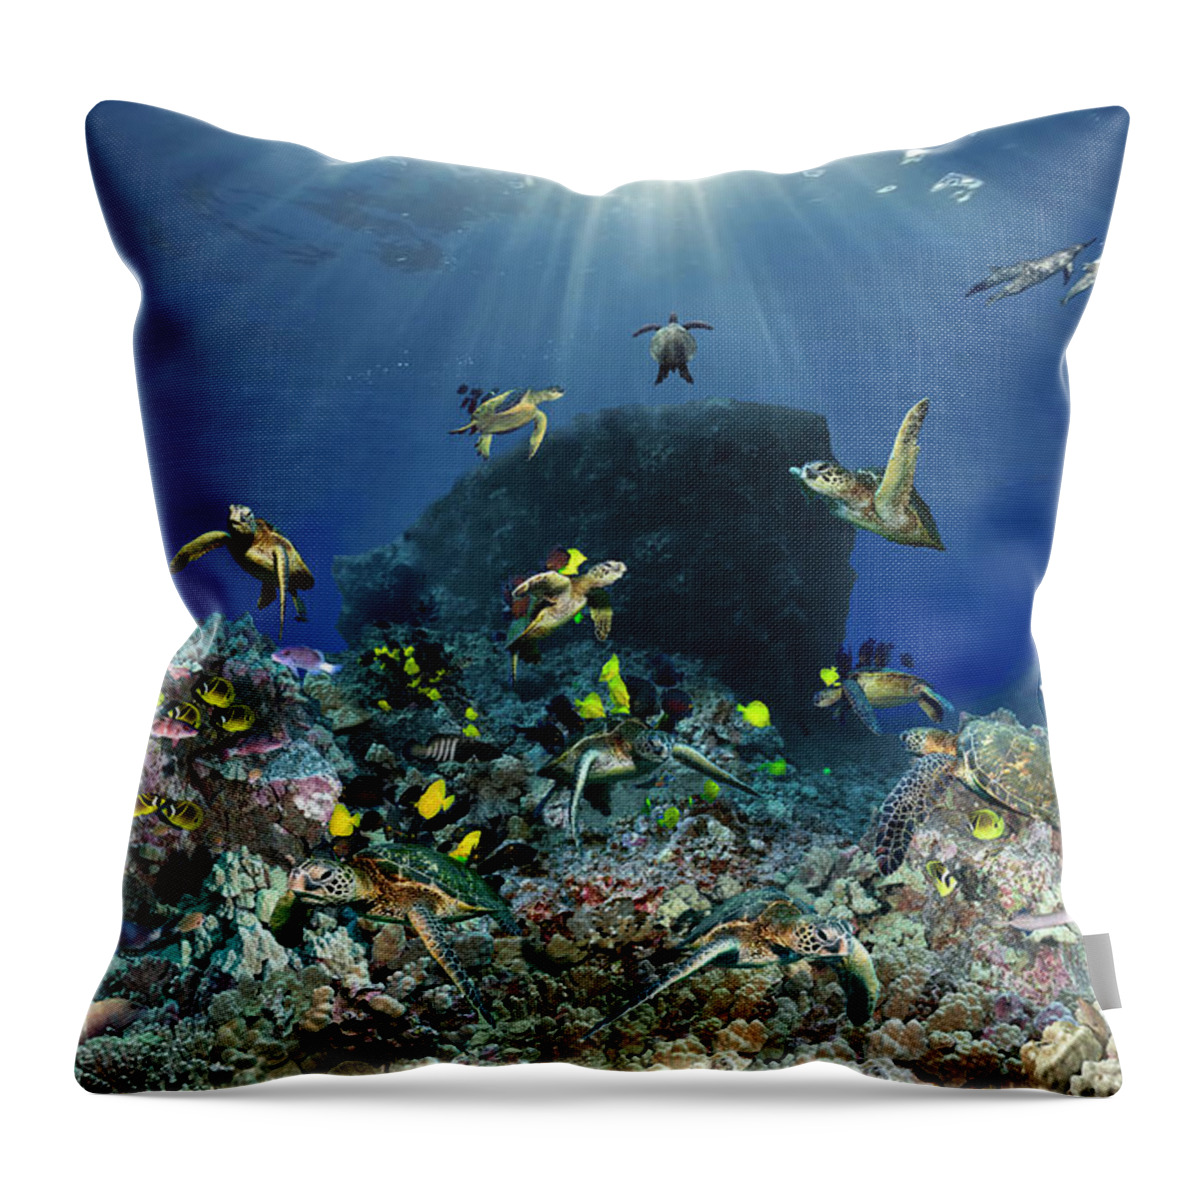 Marine Throw Pillow featuring the photograph Turtle pinnacle by Artesub